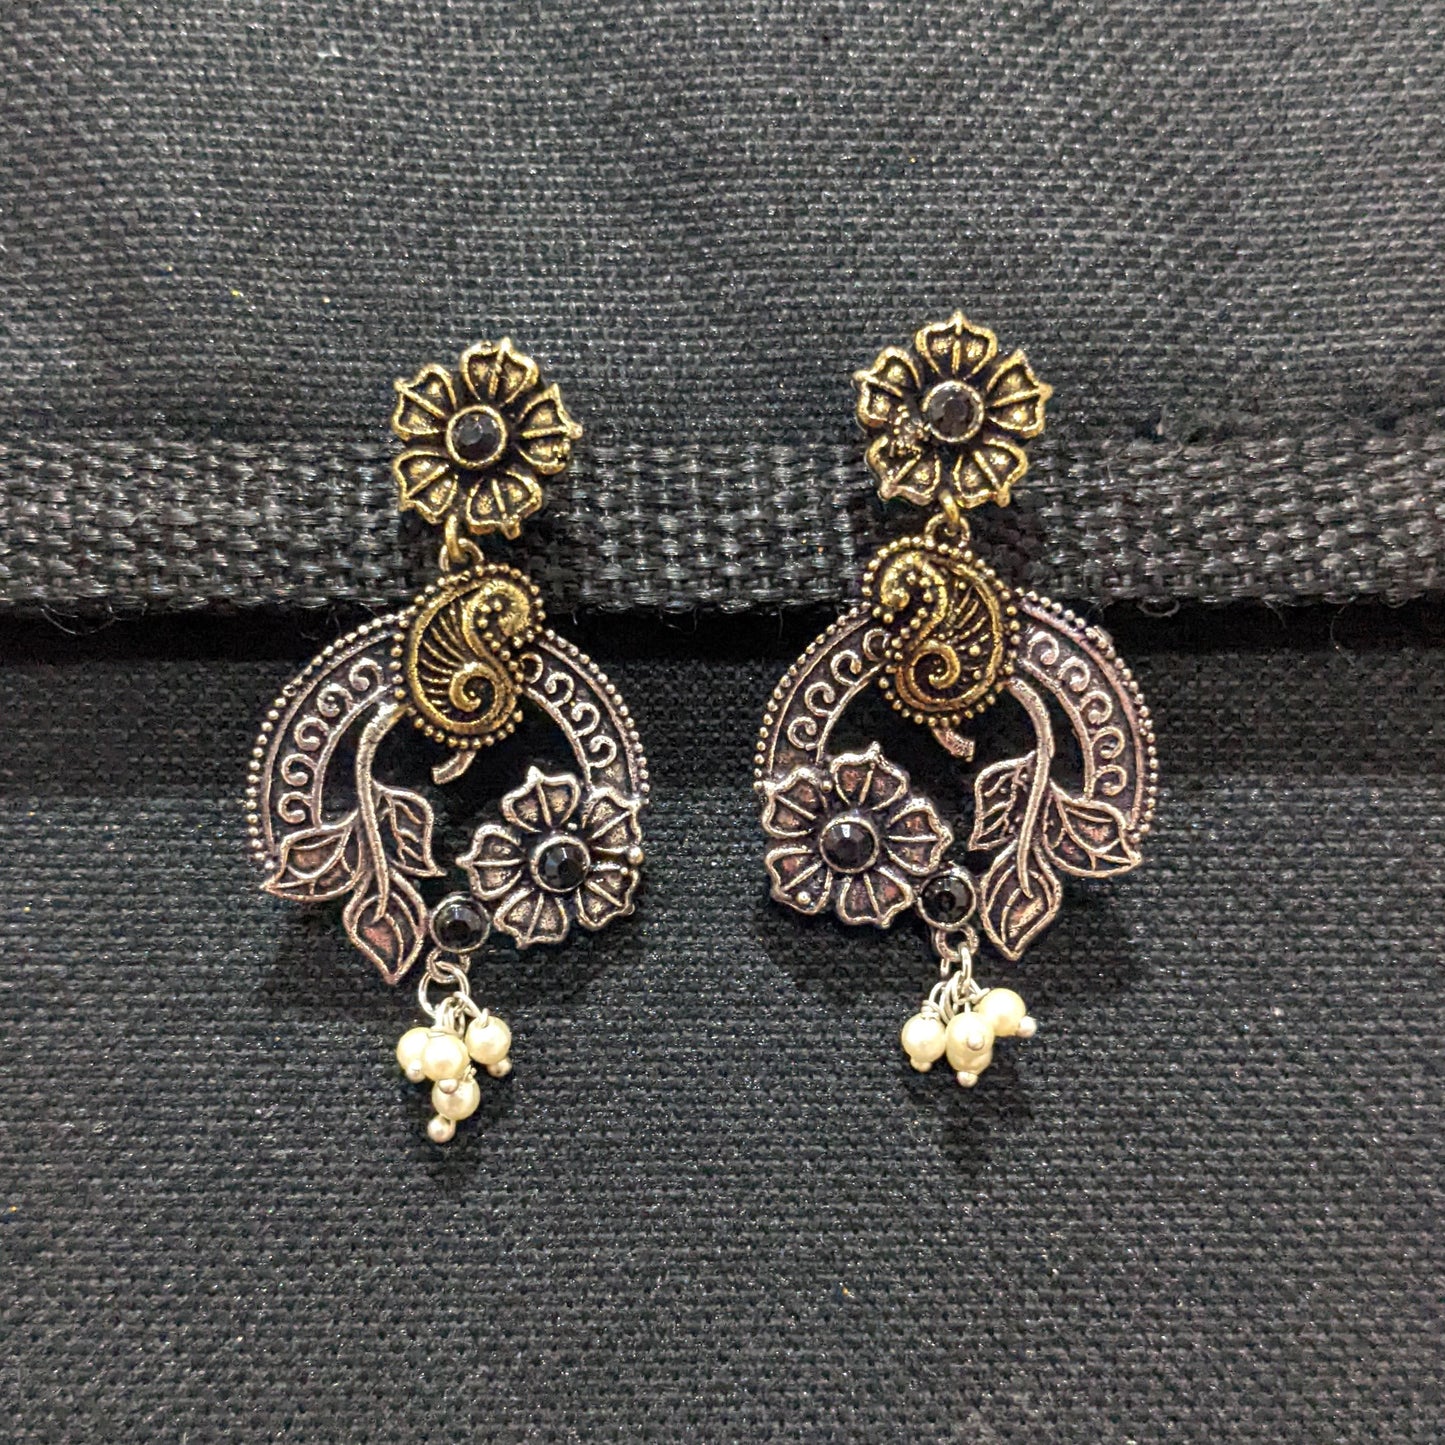 Oxidized Dual Tone Earring - Different designs available